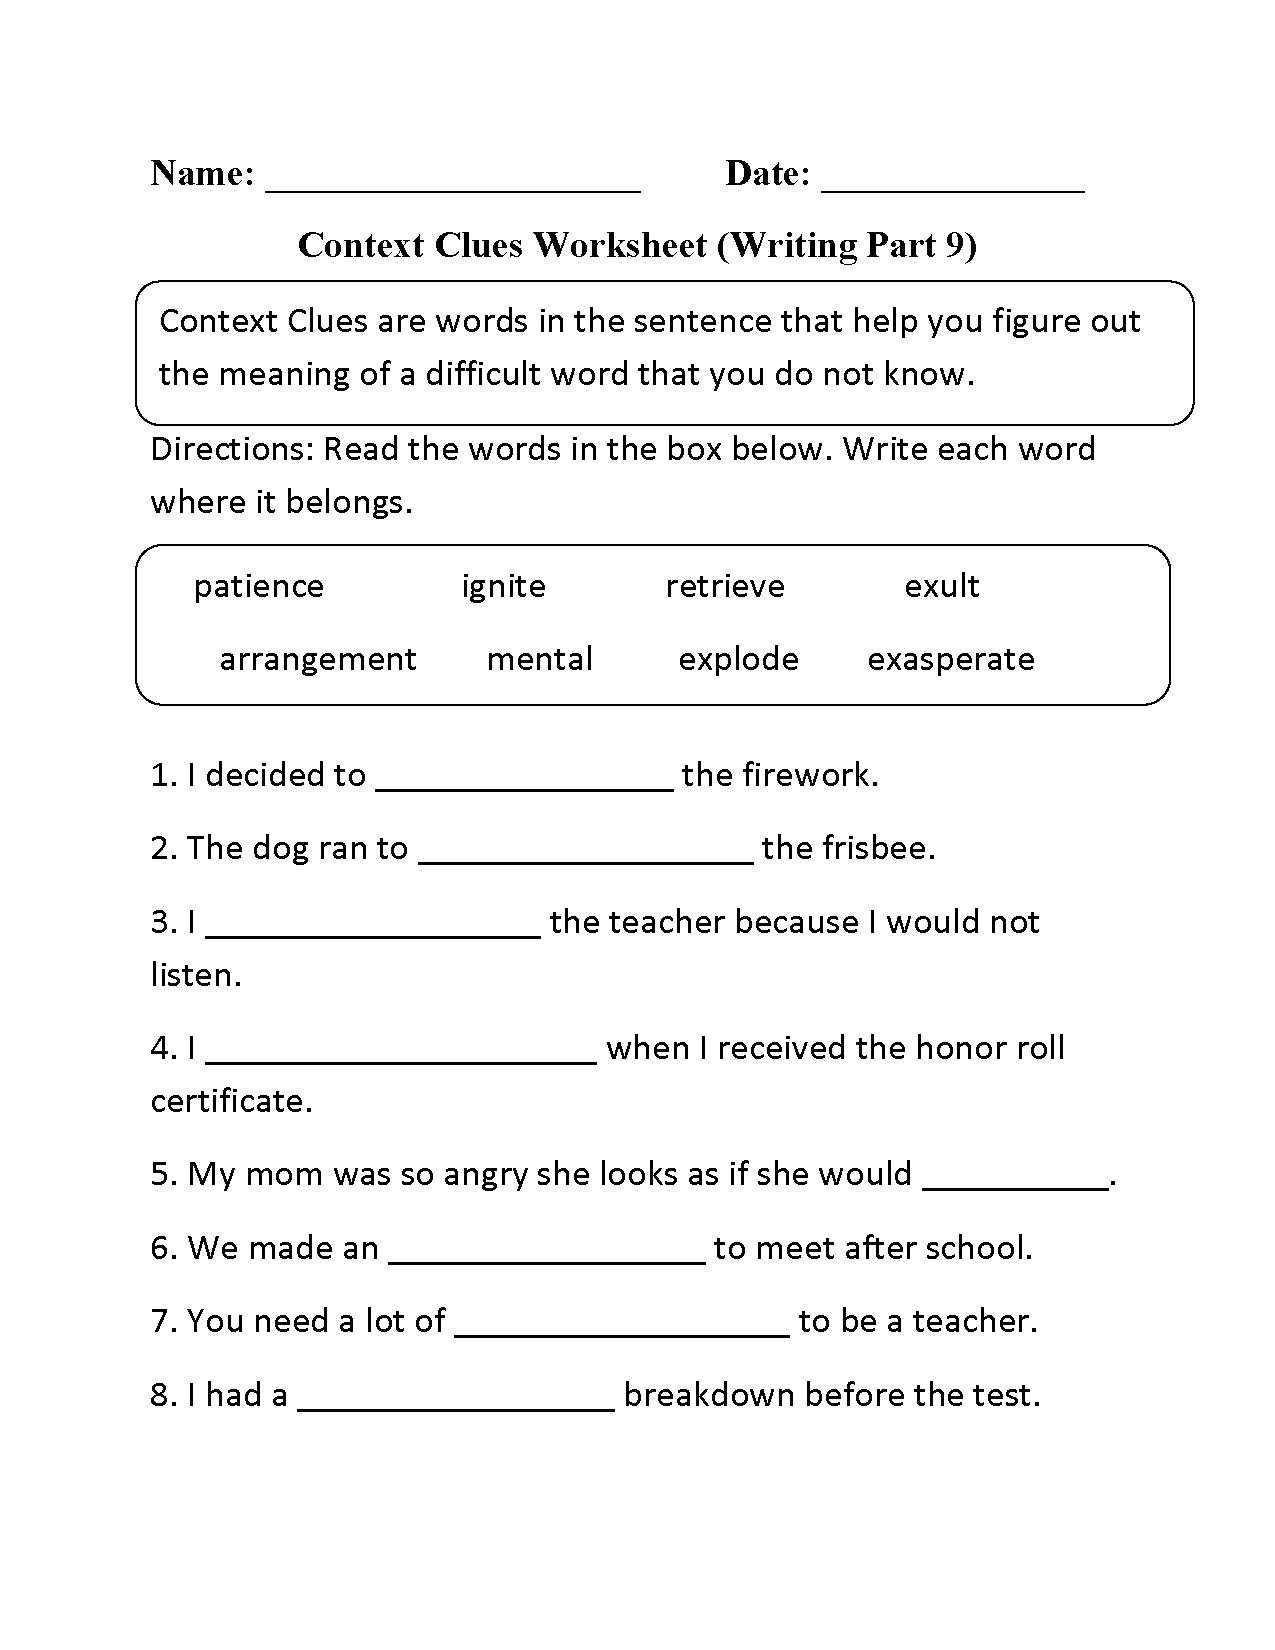 Context Clues Worksheet Writing Part 9 Intermediate | Englishlinx - Free Printable 5Th Grade Context Clues Worksheets